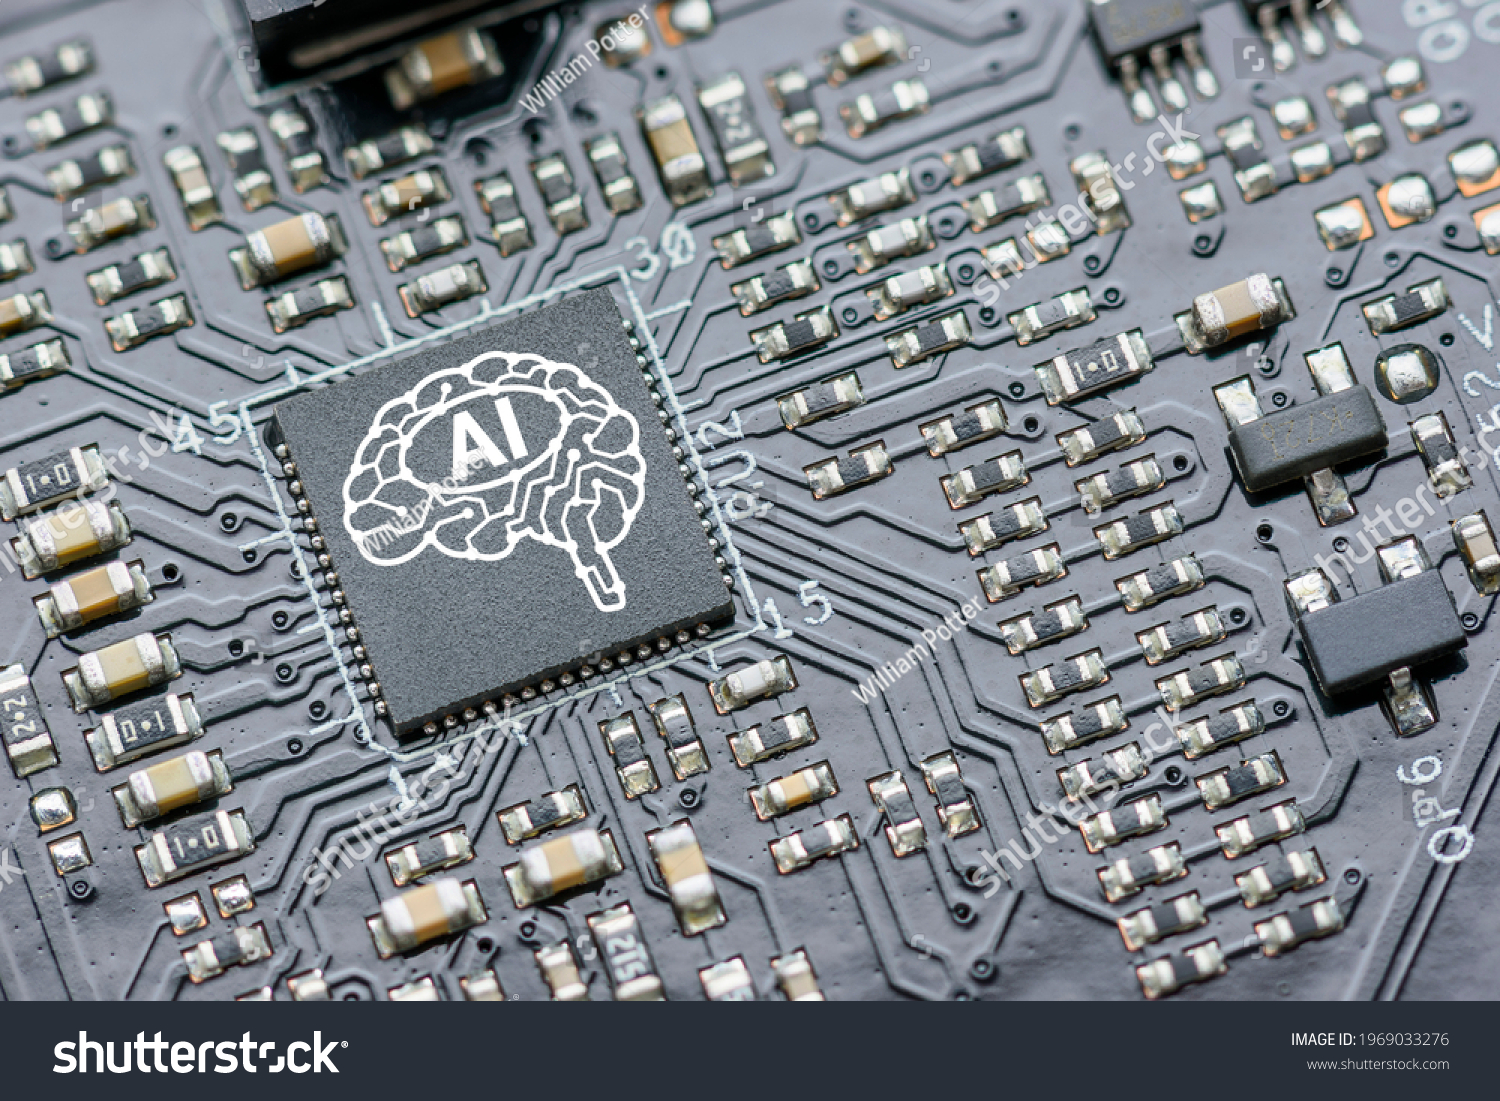 Processor for AI acceleration, CPU Central processing Unit or GPU microchip on a motherboard. AI-focused hardware and software is upgraded in mobile processor and smart device to imitate human brain #1969033276